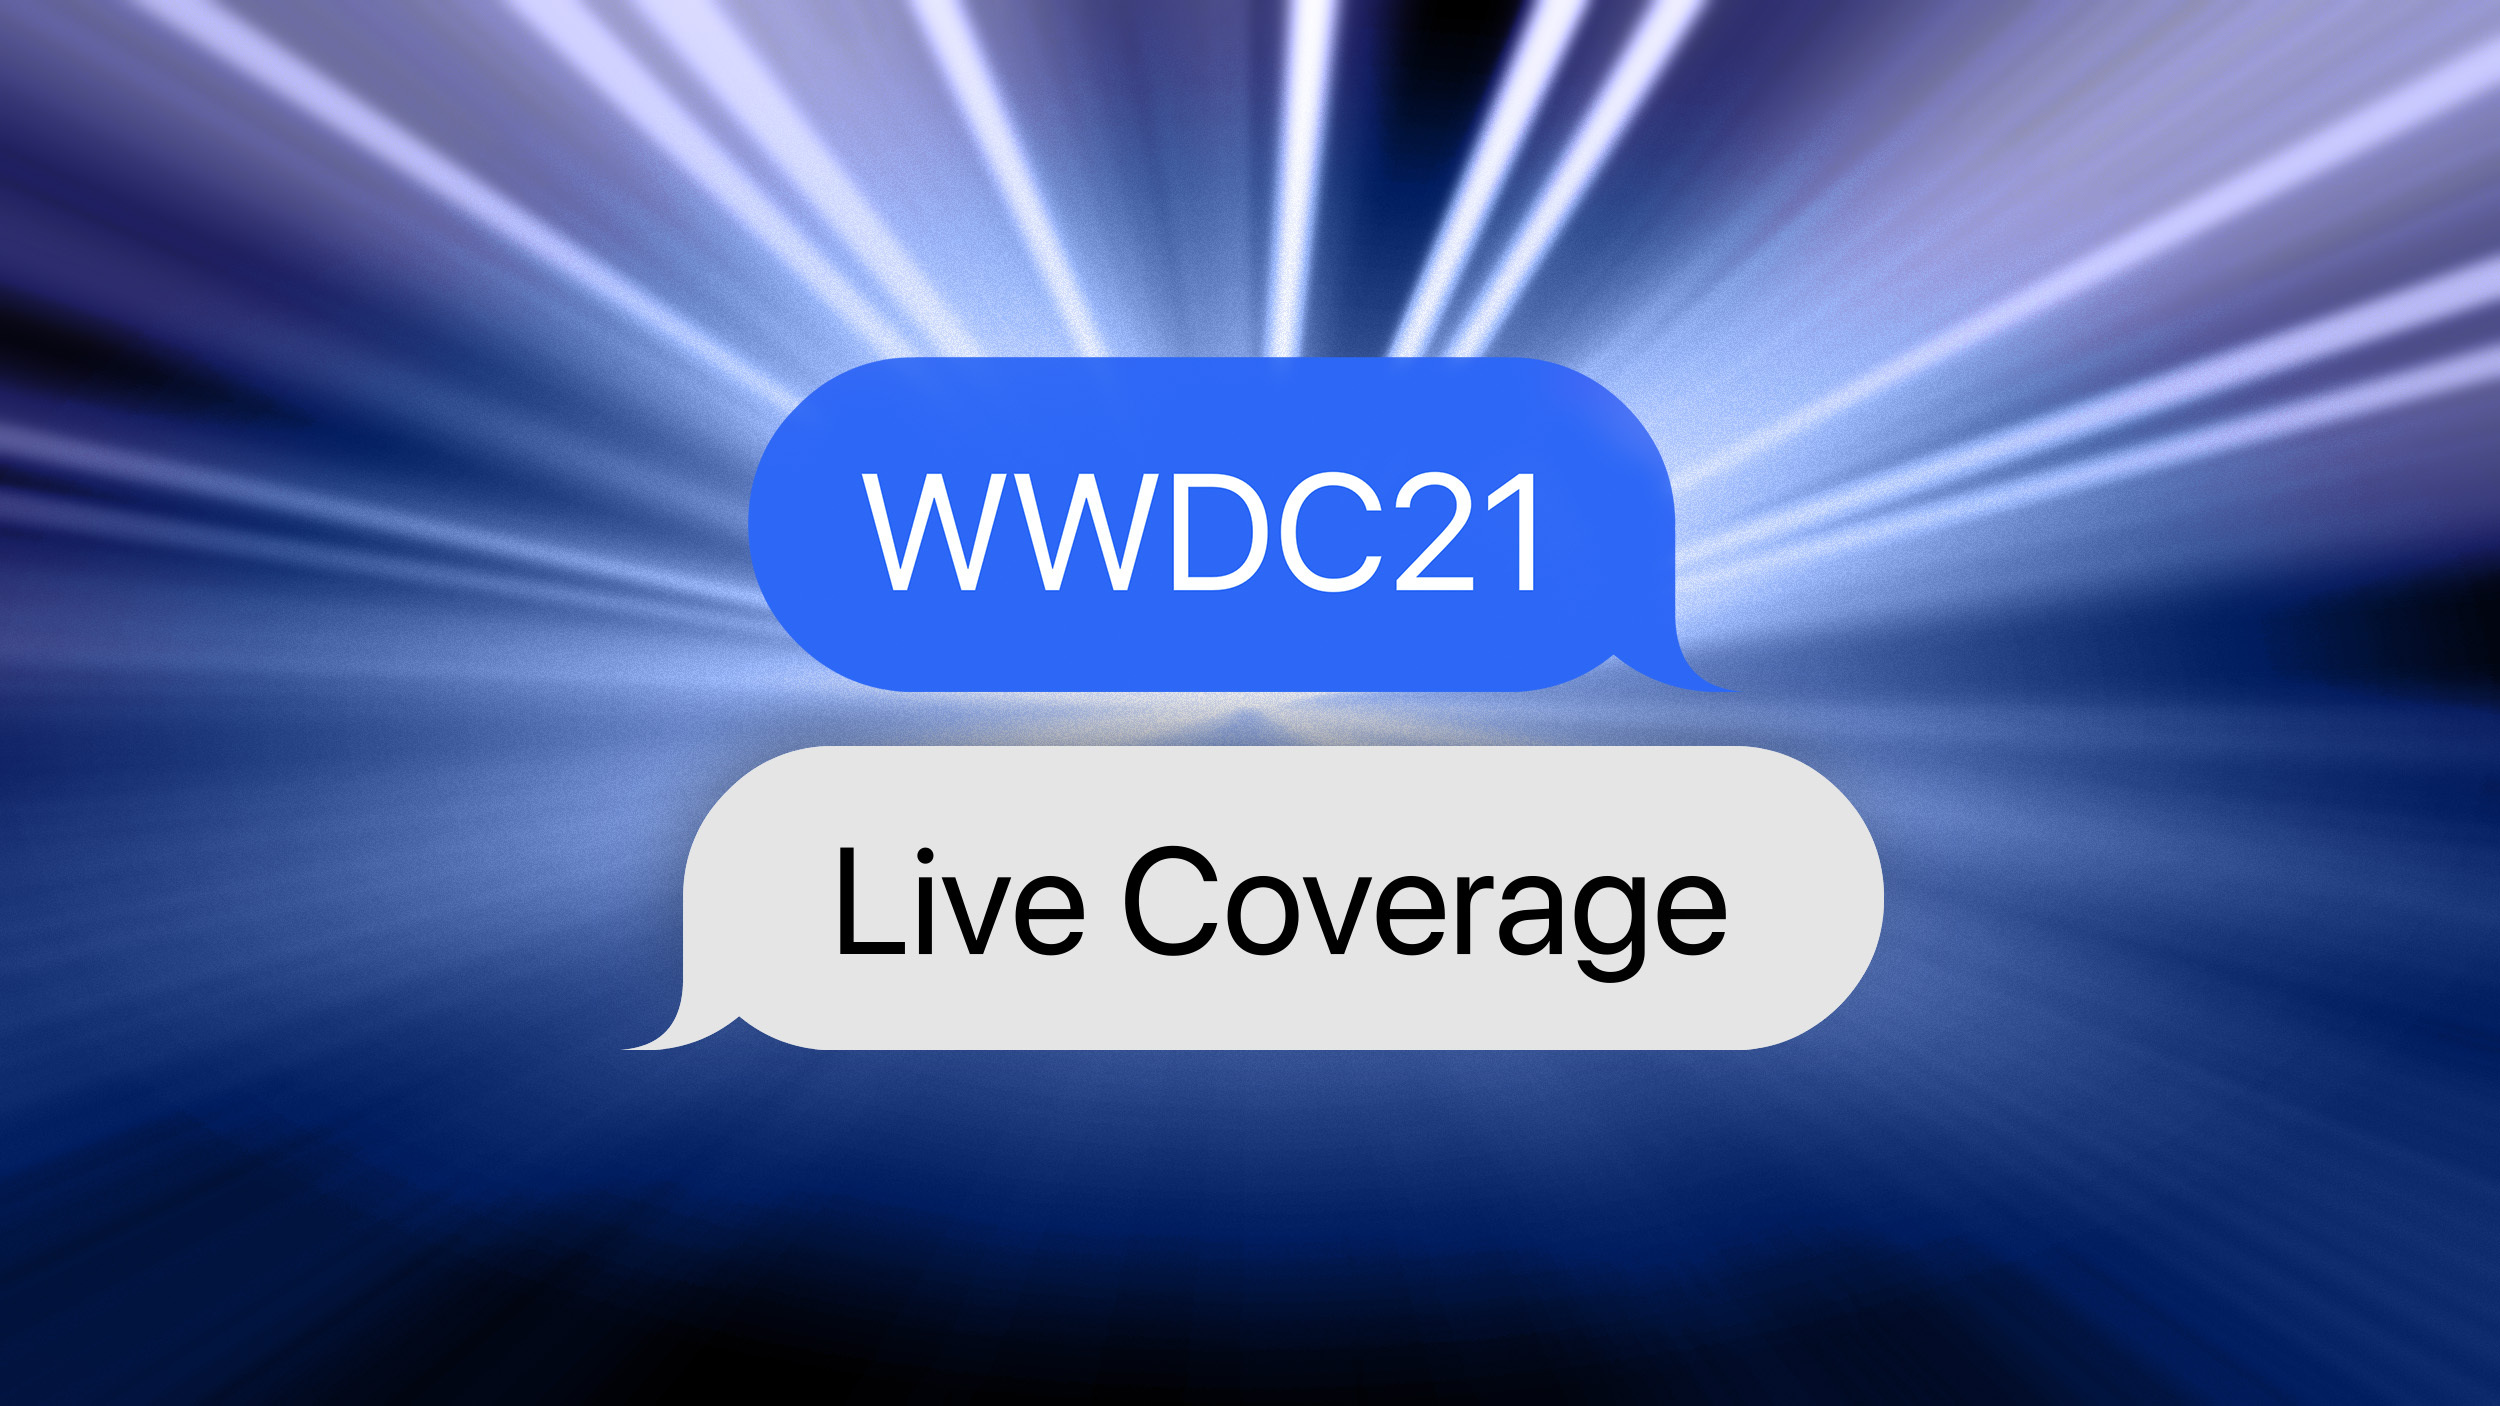 wwdc 2021 meaning